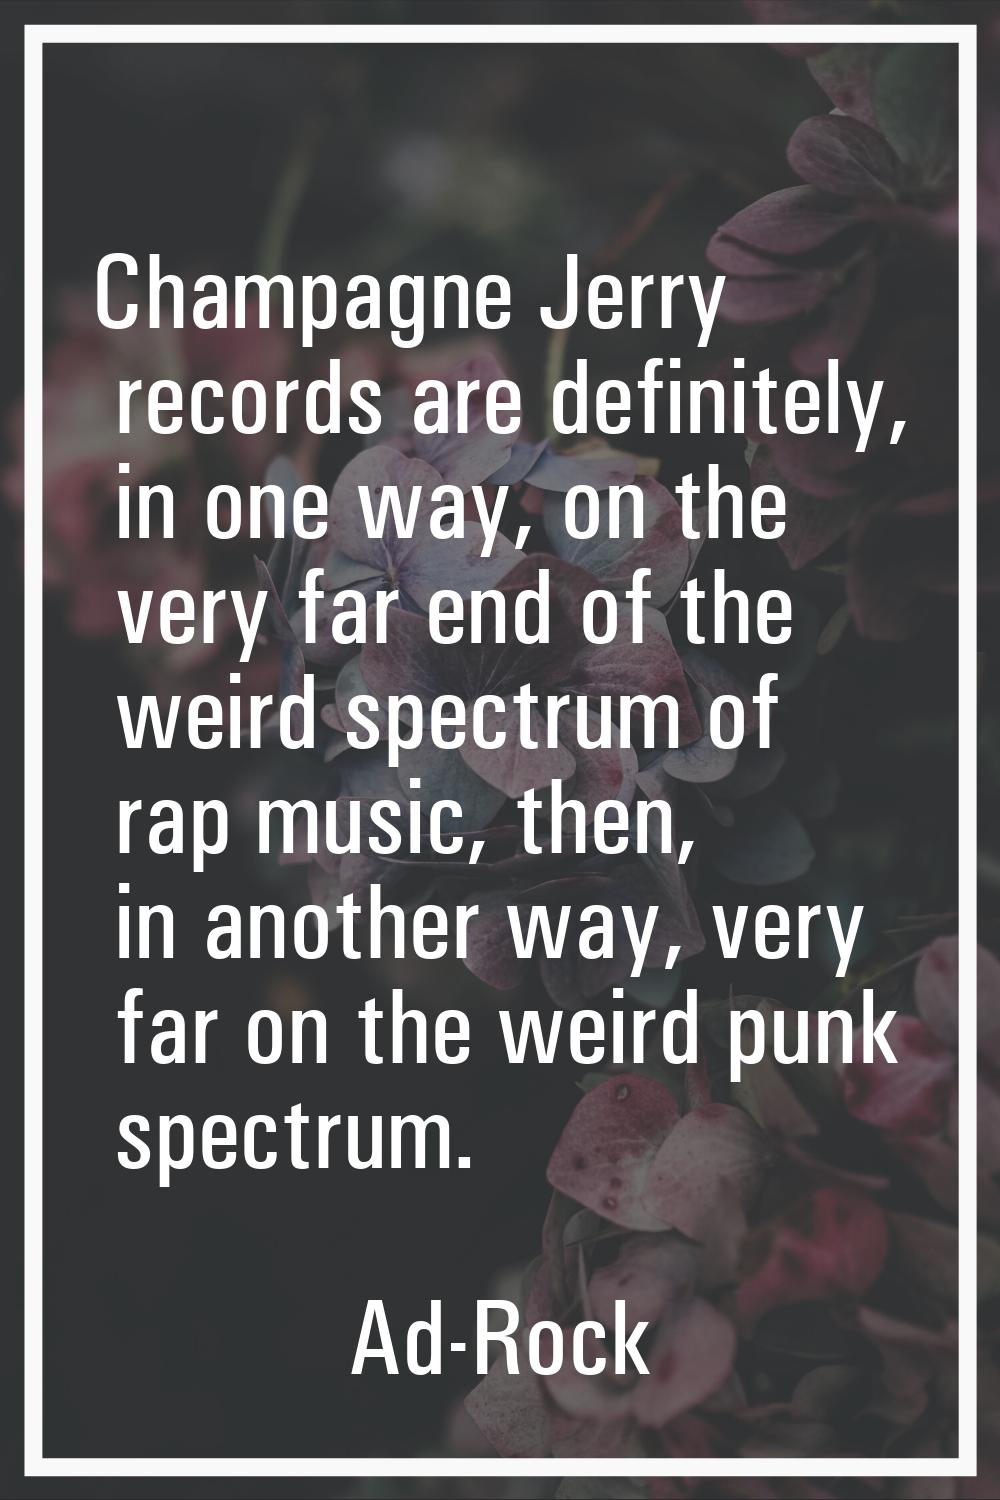 Champagne Jerry records are definitely, in one way, on the very far end of the weird spectrum of ra